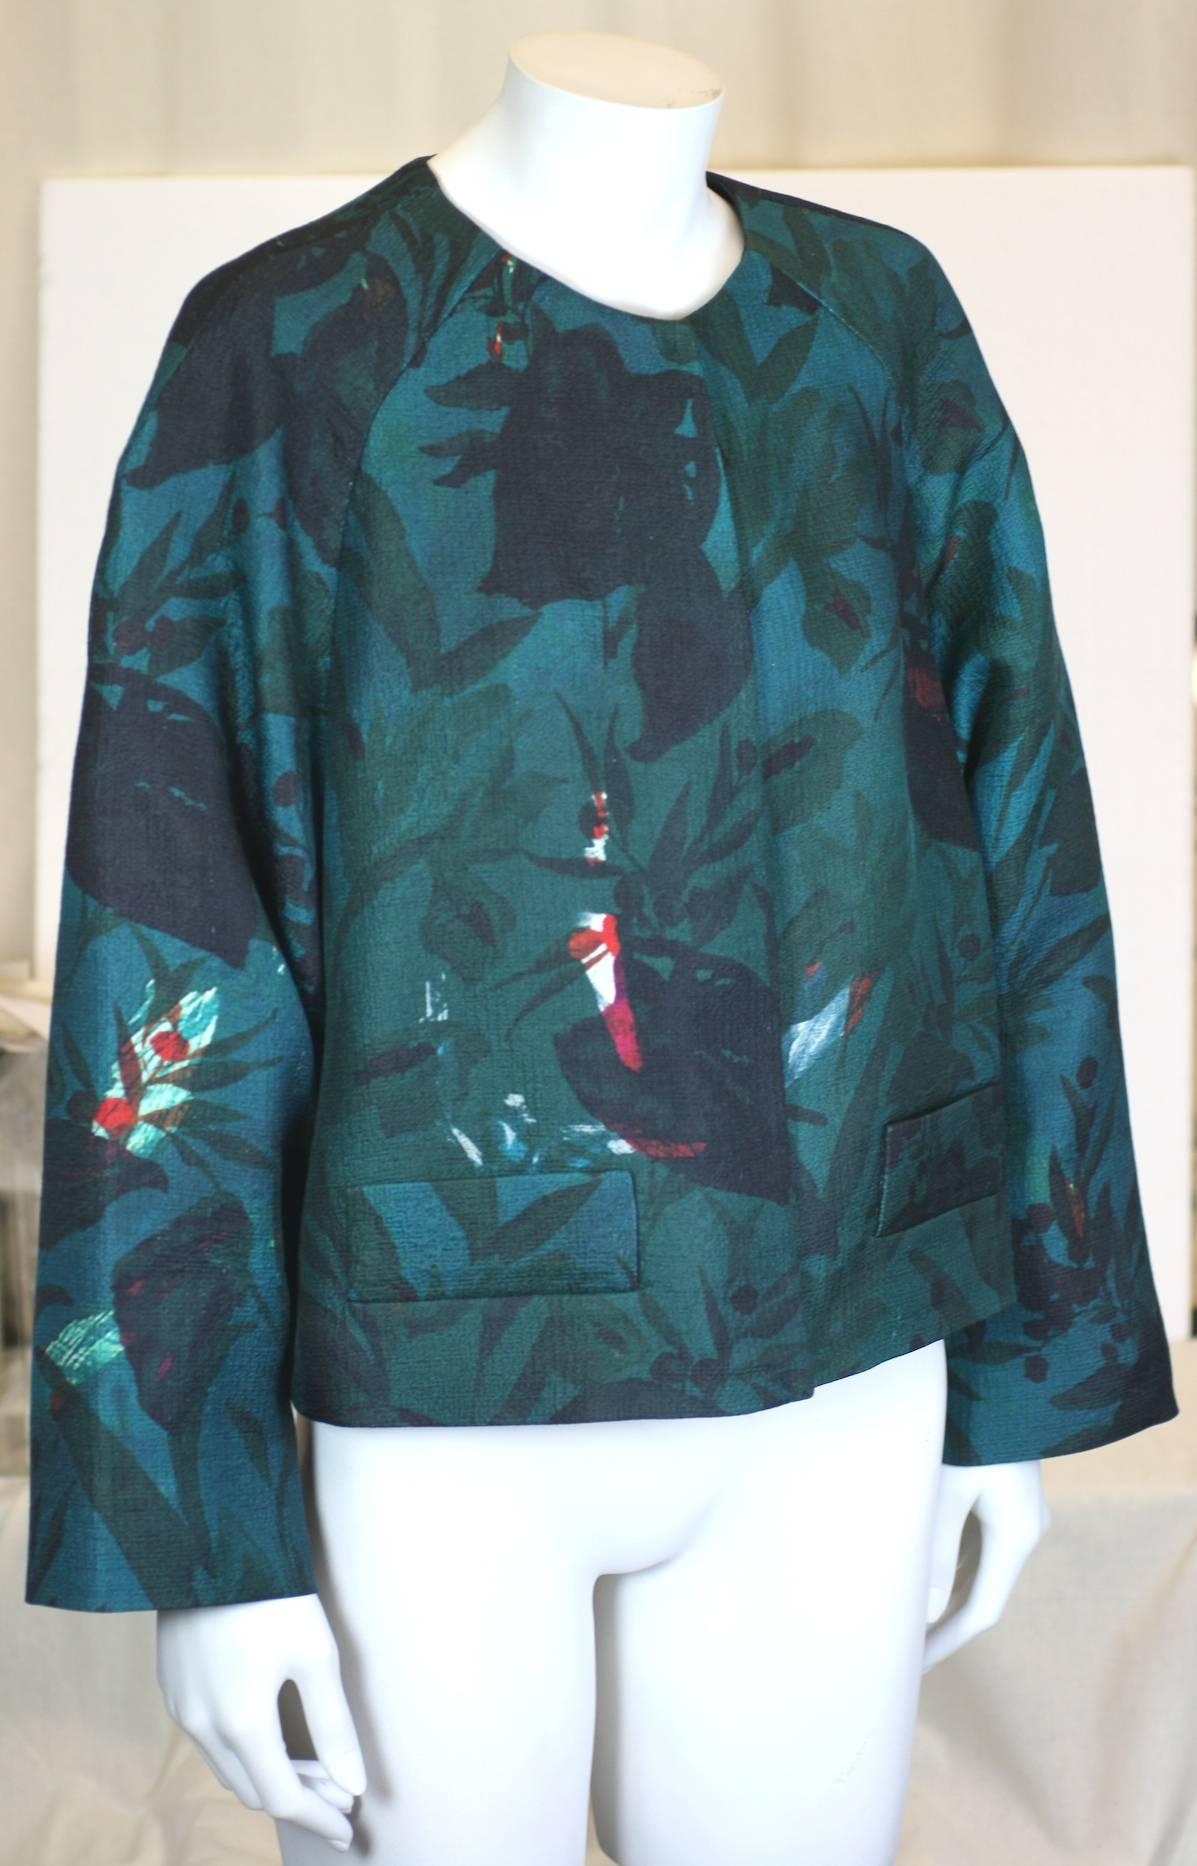 Dries Van Noten Dark Floral Jacket in wool/silk blend. Strikingly elegant print in deep tonal colors. 
Jacket is cut full with large snap closures. Tucks at the back of neck balloon out the back of the jacket. 2000's France. 
Size 42. Excellent